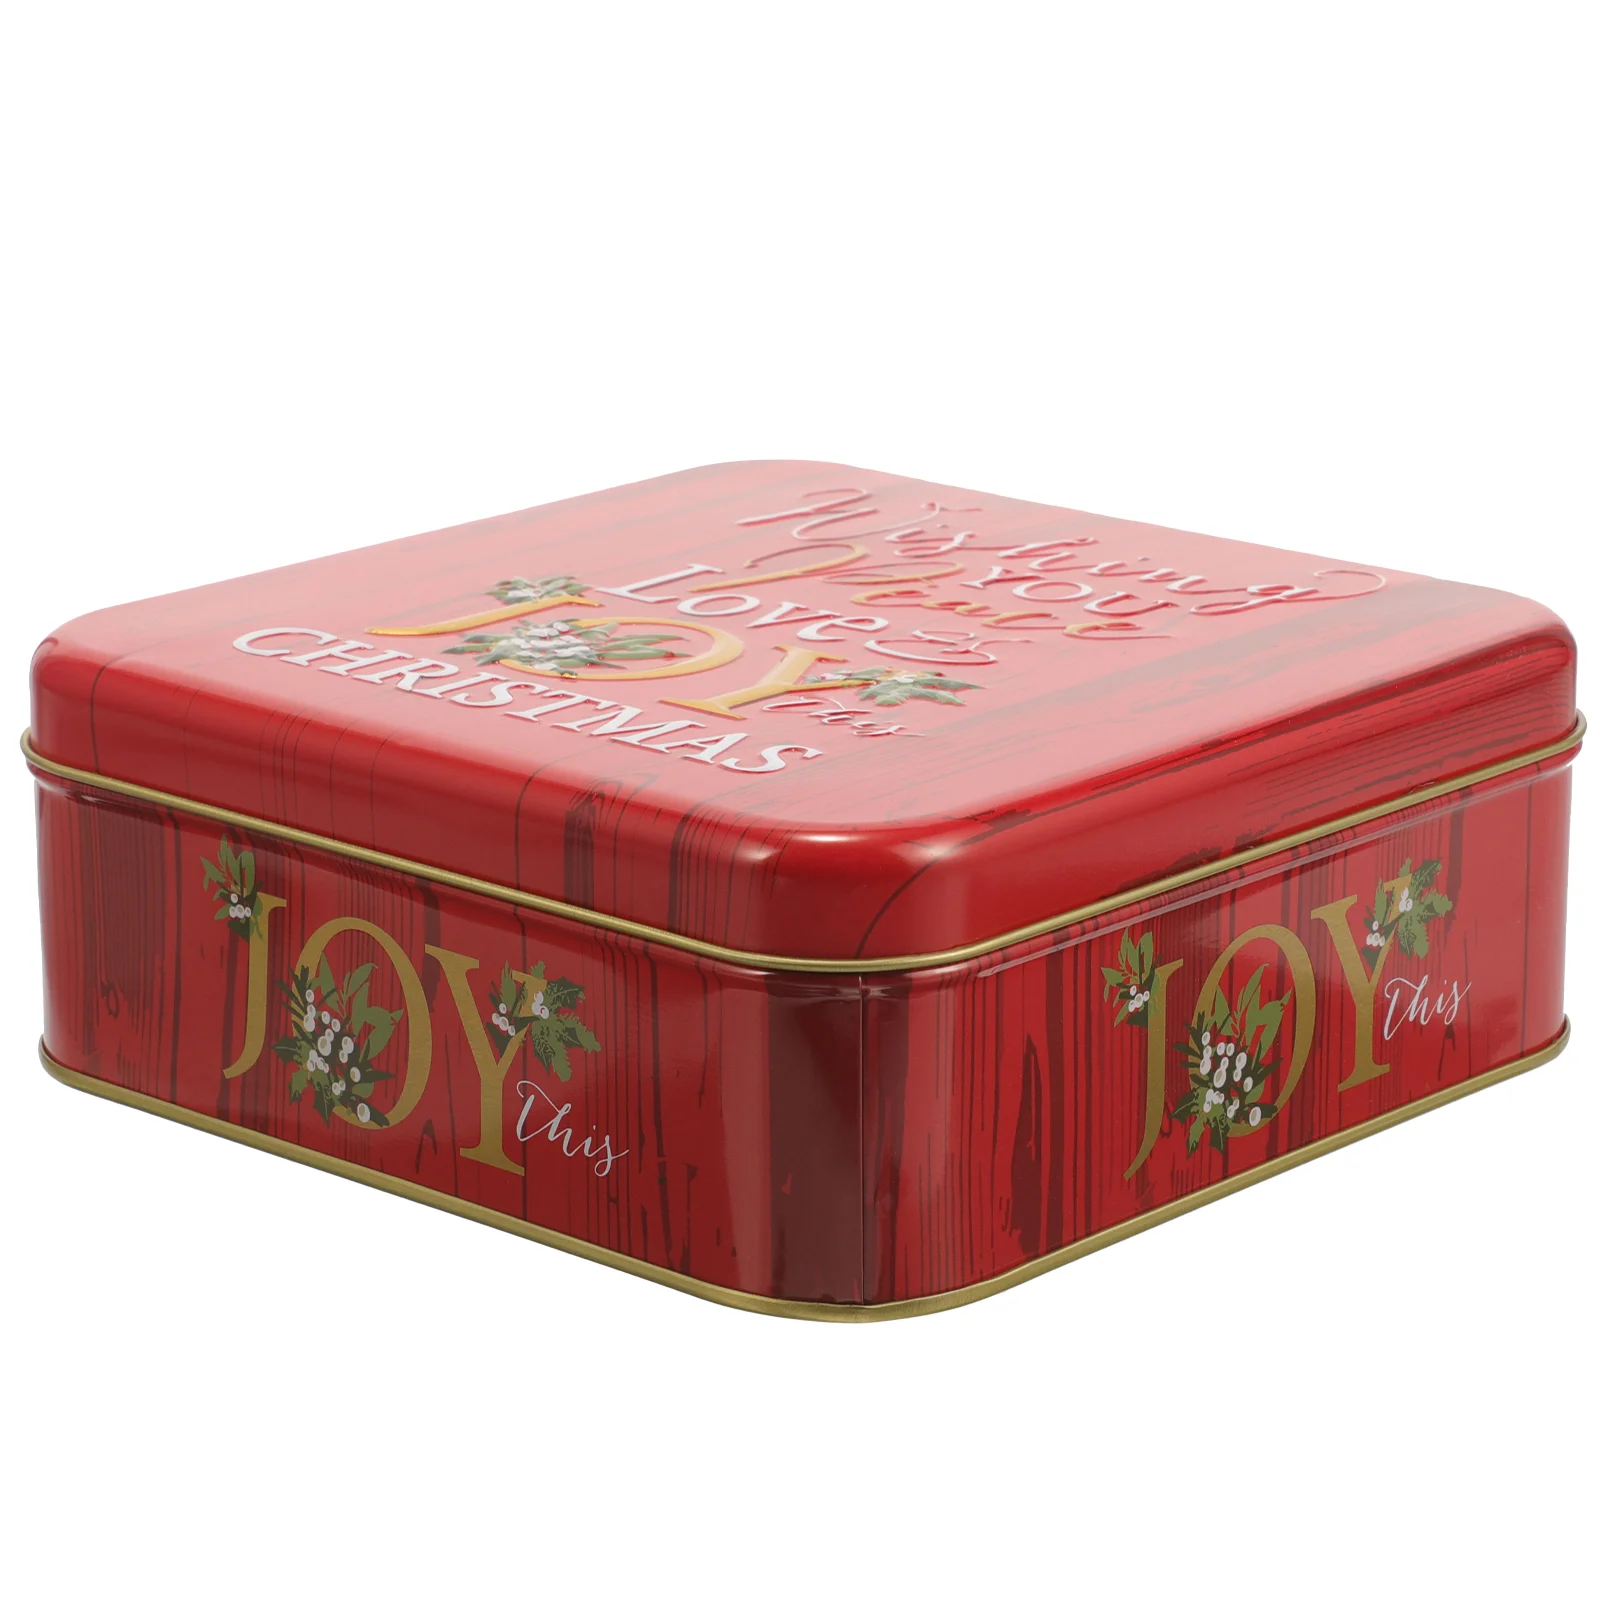 

Candy Packing Box Tinplate Cookie Tin Cookie Box Candy Box Christmas Biscuits Candy Treat Box